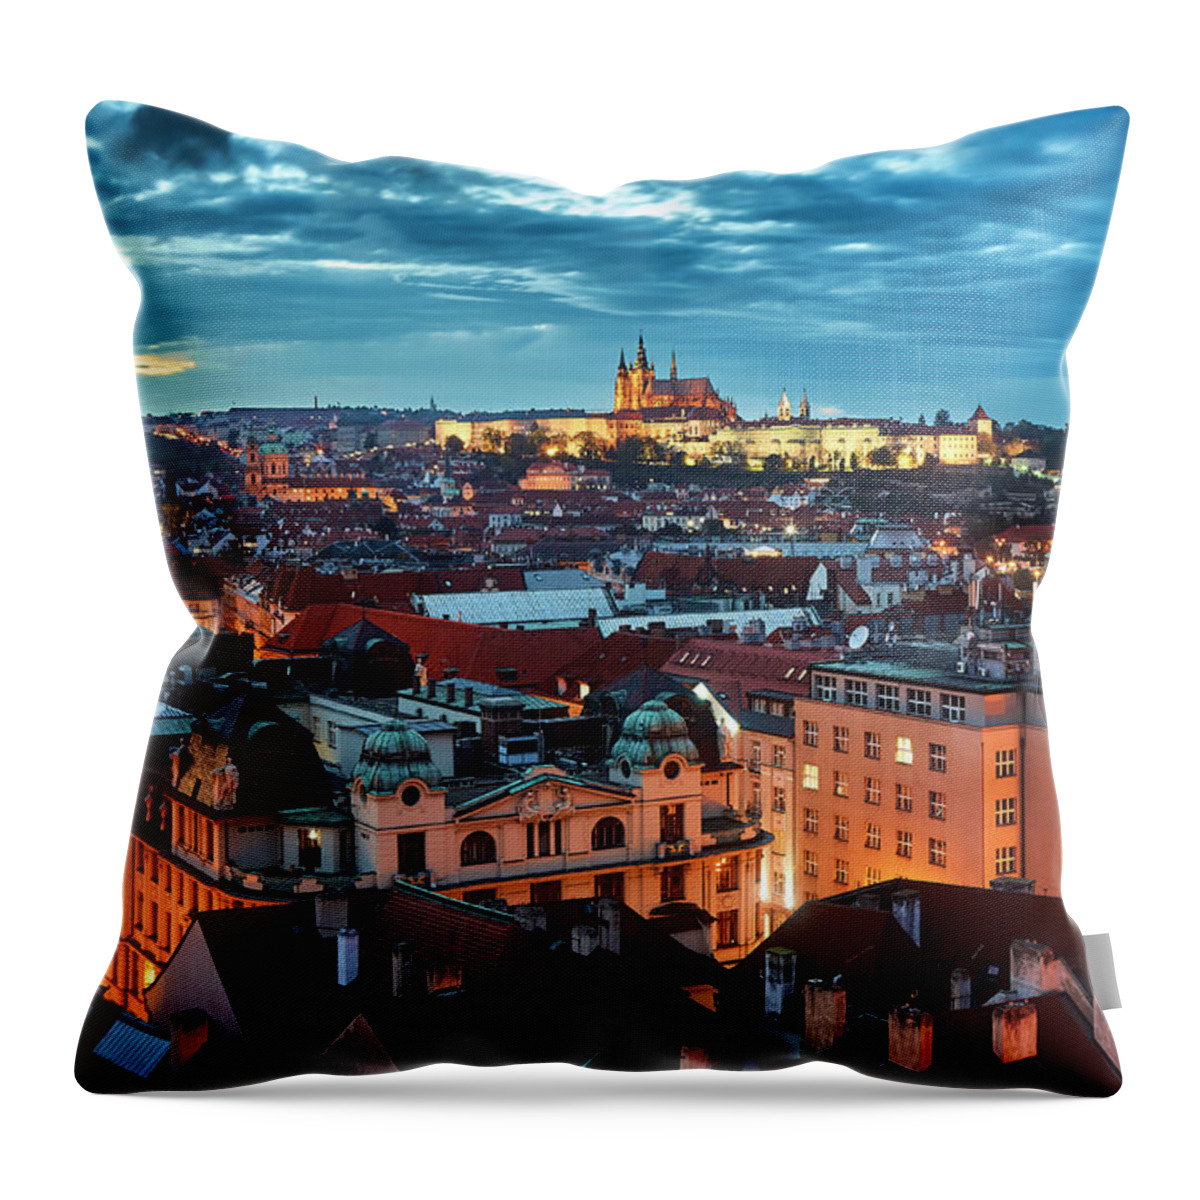 Cityscape Throw Pillow featuring the pyrography Prague at night by Dmitry Dreyer